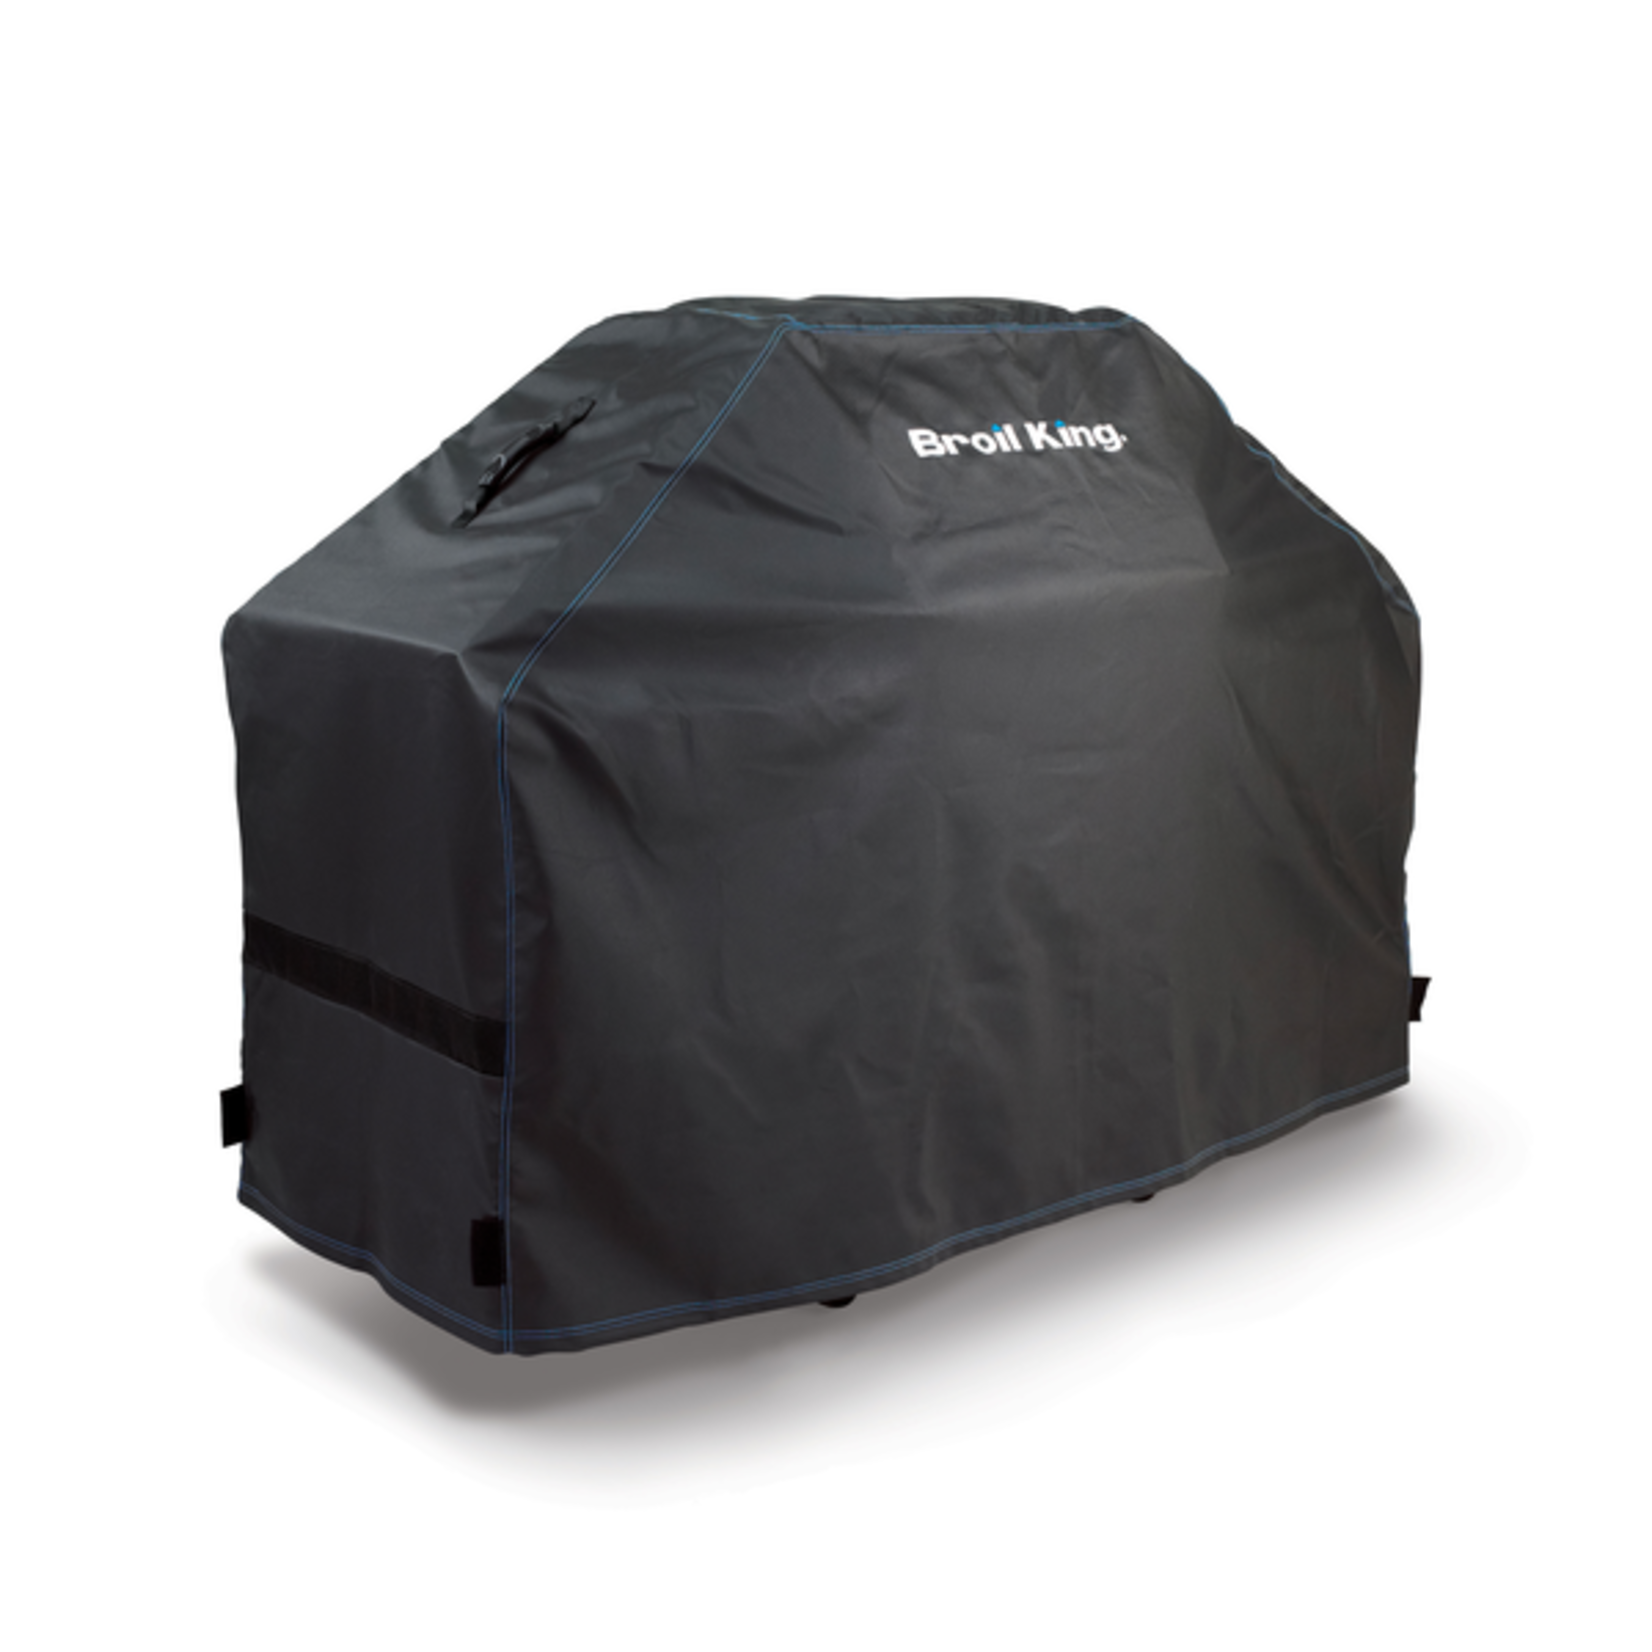 Broil King Grill Cover - Premium - Imperial/Regal XL Series